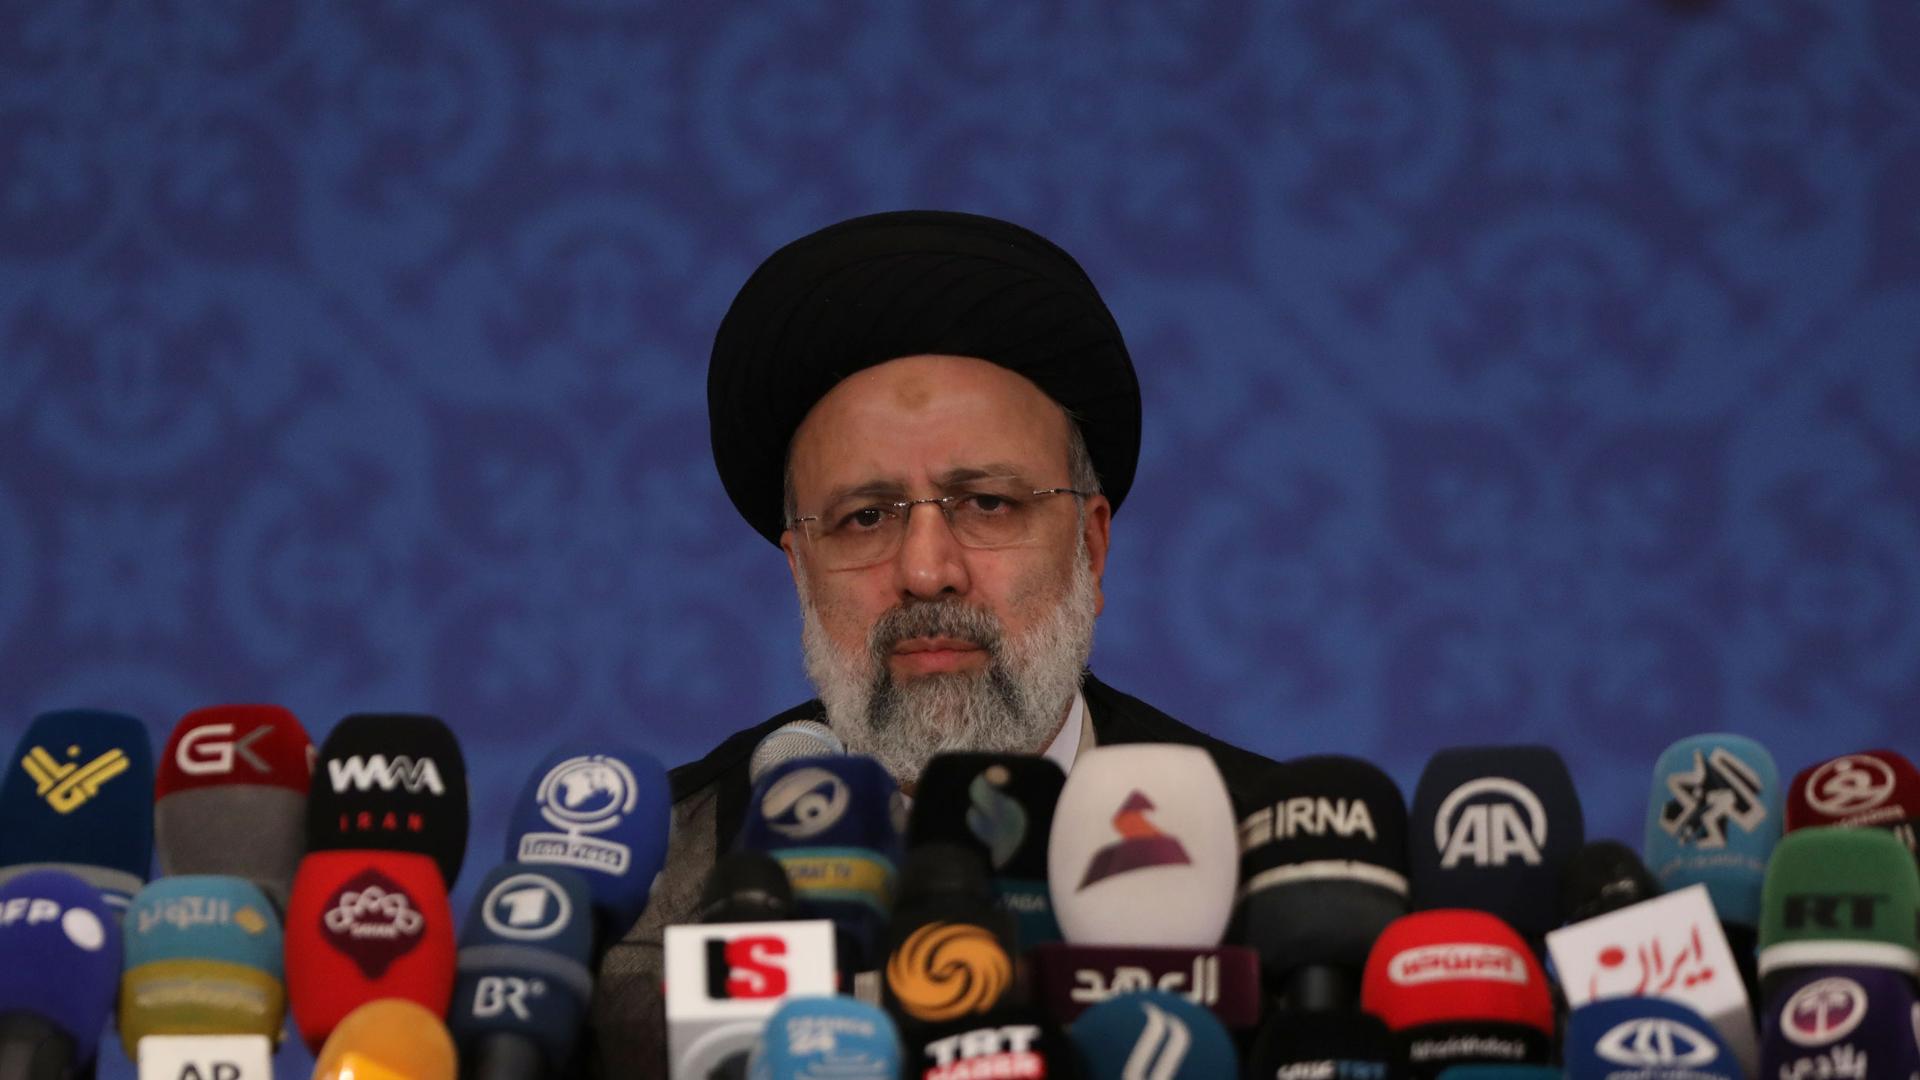 Iranian President Ebrahim Raisi is shown behind a large number of microphones.